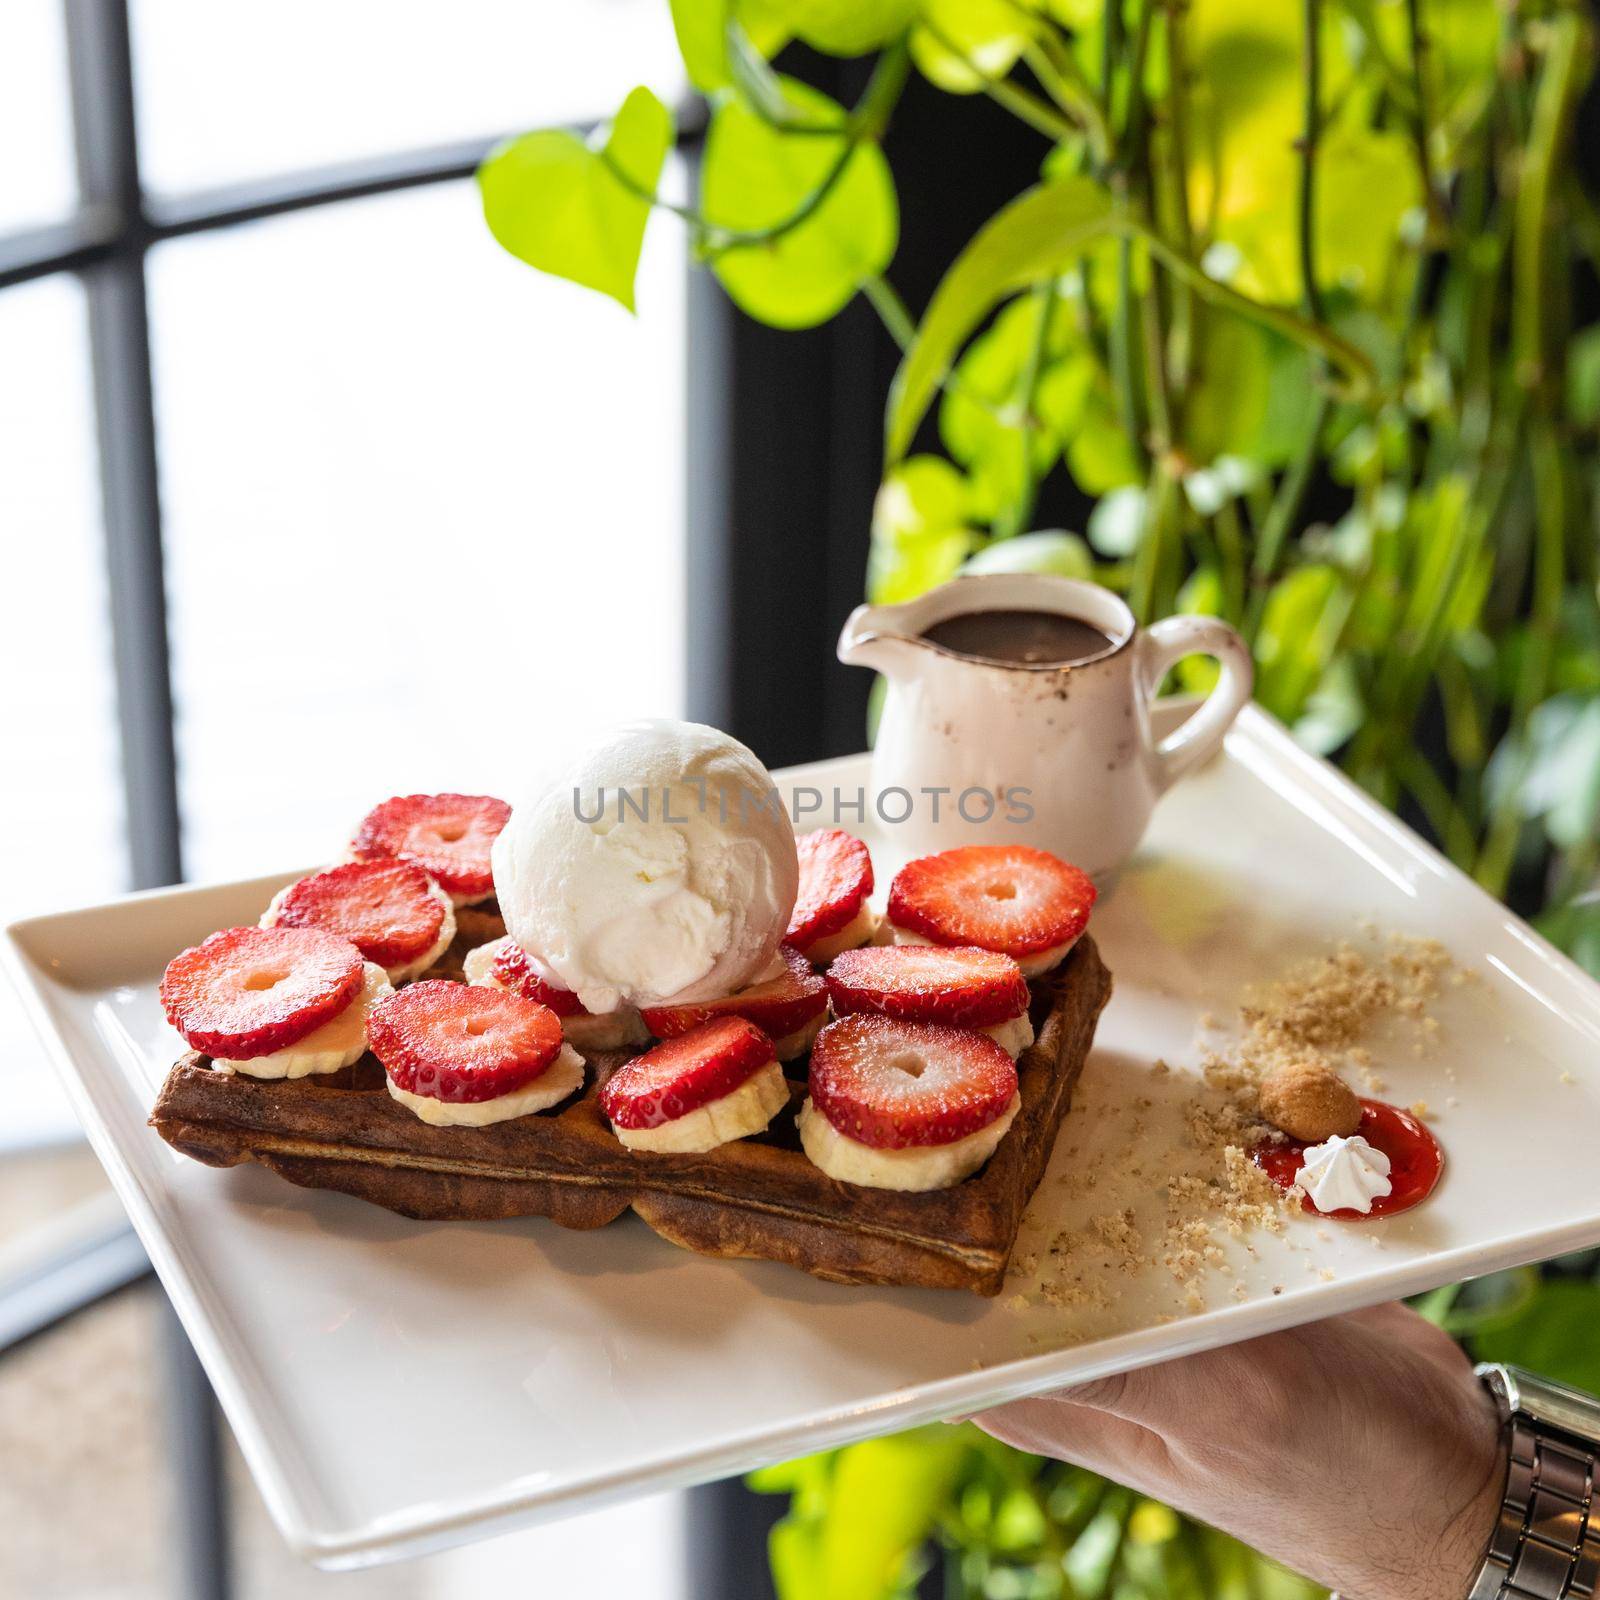 Tasty strawberry snack, garnish on the wooden plate